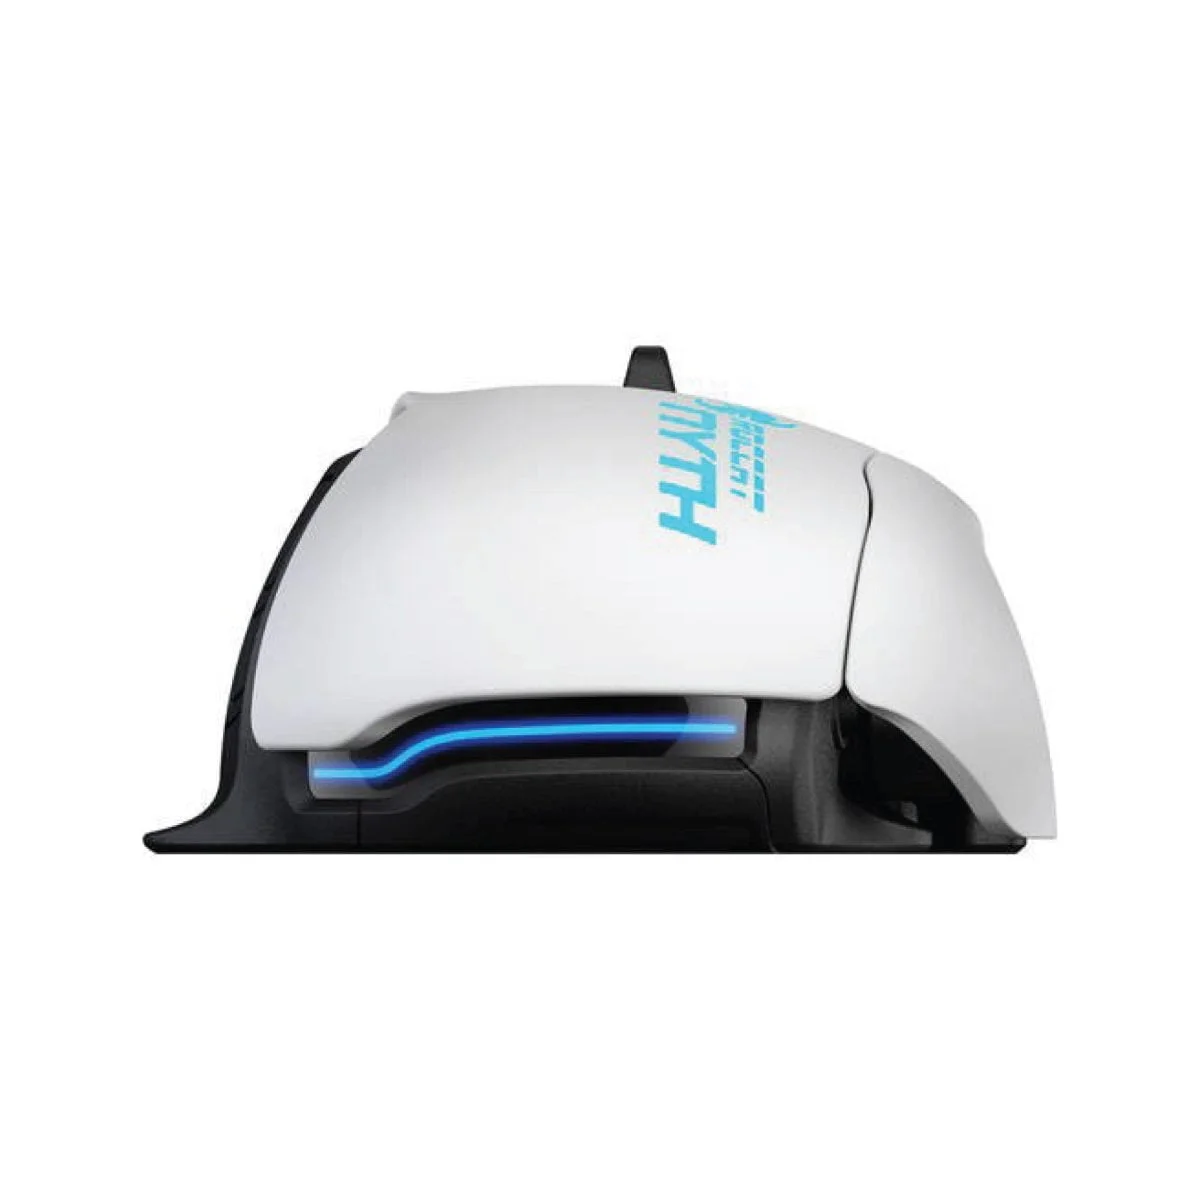 64D 05 Scaled Roccat &Lt;Div Id=&Quot;Shopify-Section-Product-Template&Quot; Class=&Quot;Shopify-Section&Quot;&Gt; &Lt;Div Id=&Quot;Productsection-Product-Template&Quot; Class=&Quot;Product-Template__Container Page-Width&Quot; Data-Section-Id=&Quot;Product-Template&Quot; Data-Section-Type=&Quot;Product&Quot; Data-Enable-History-State=&Quot;True&Quot; Data-Ajax-Enabled=&Quot;True&Quot;&Gt; &Lt;Div Class=&Quot;Grid Product-Single Product-Single--Medium-Media&Quot;&Gt; &Lt;Div Class=&Quot;Grid__Item Medium-Up--One-Half&Quot;&Gt; &Lt;Div Class=&Quot;Product-Single__Description Rte&Quot;&Gt; The Roccat Nyth Is A Customizable 18-Button Mmo Gaming Mouse With A Laser Sensor With Up To 12.000 Dpi. Order Yours Today. &Nbsp; &Lt;/Div&Gt; &Lt;/Div&Gt; &Lt;/Div&Gt; &Lt;/Div&Gt; &Lt;/Div&Gt; Https://Youtu.be/5Pwxxksrsty Roccat Roccat Nyth Modular Mmo Gaming Mouse, White